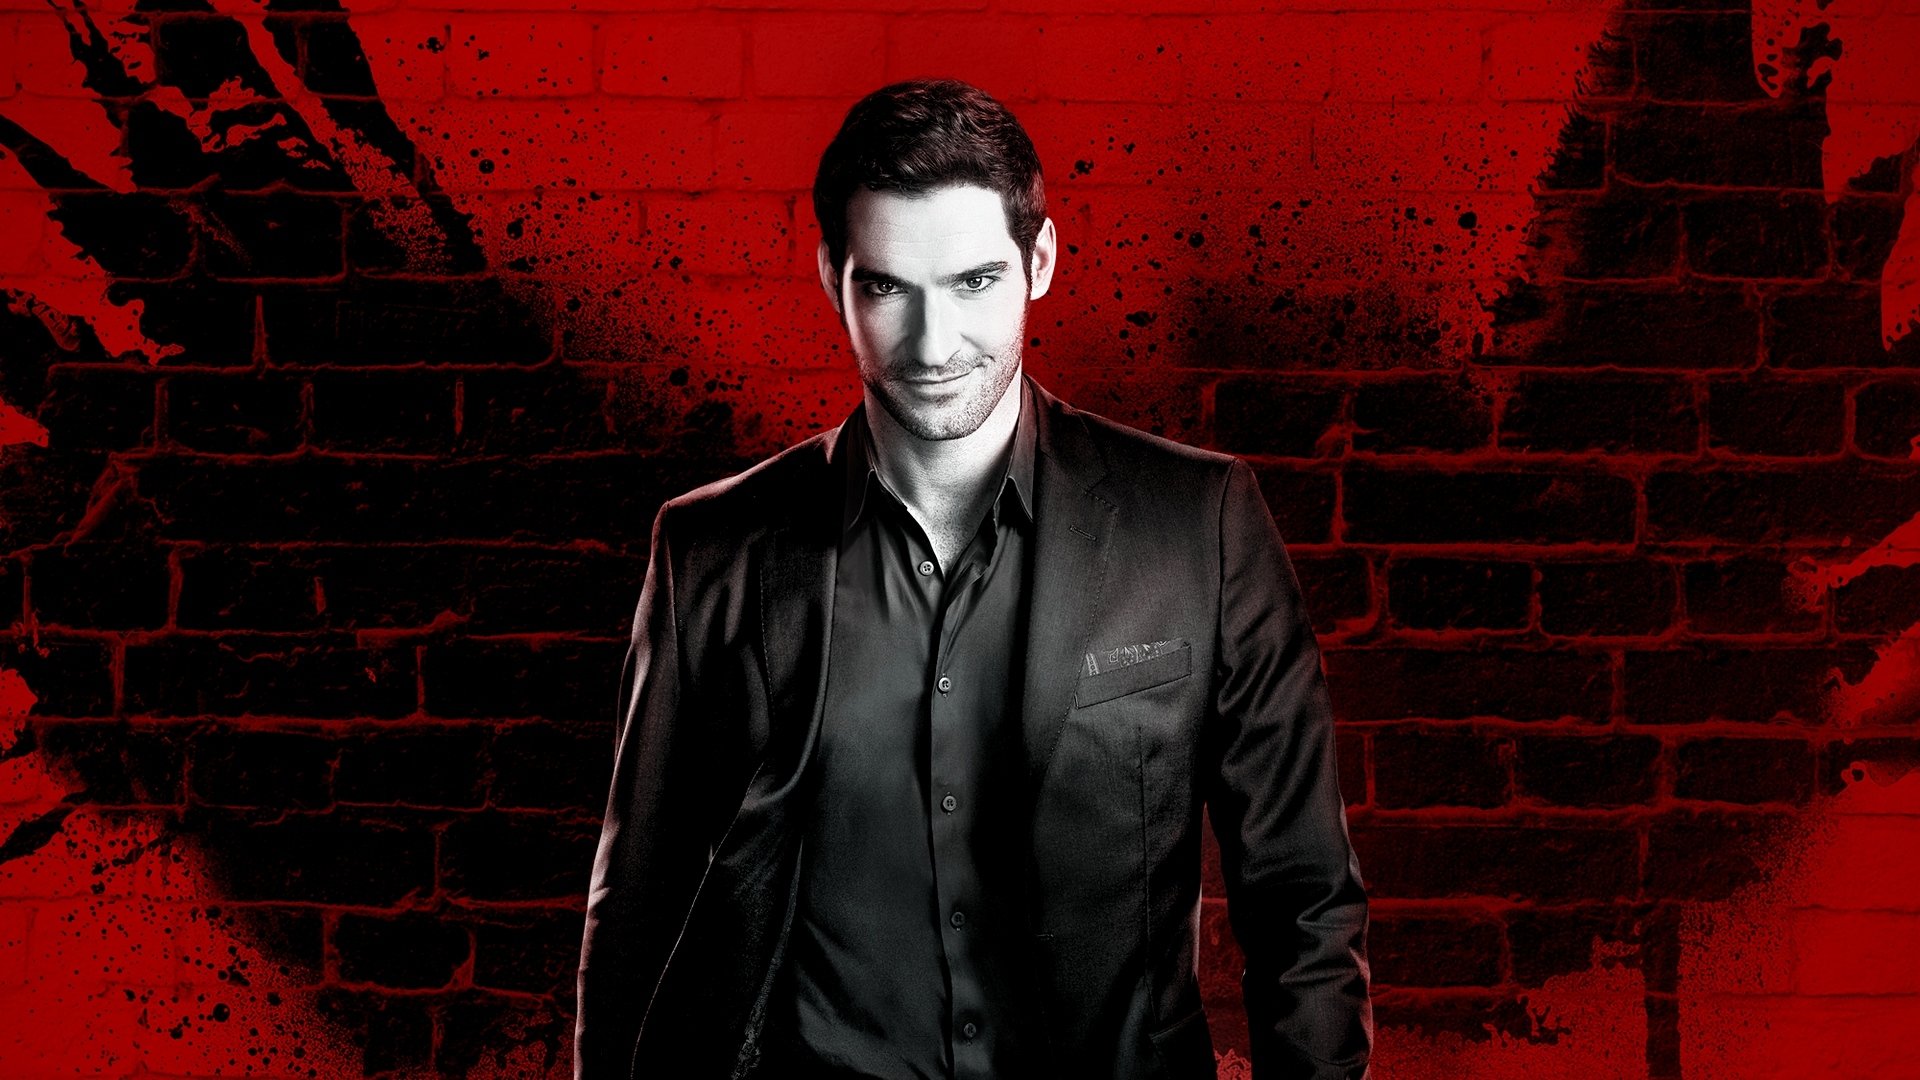 19 Lucifer HD Wallpapers | Background Images - Wallpaper Abyss
 Lucifer Wallpaper